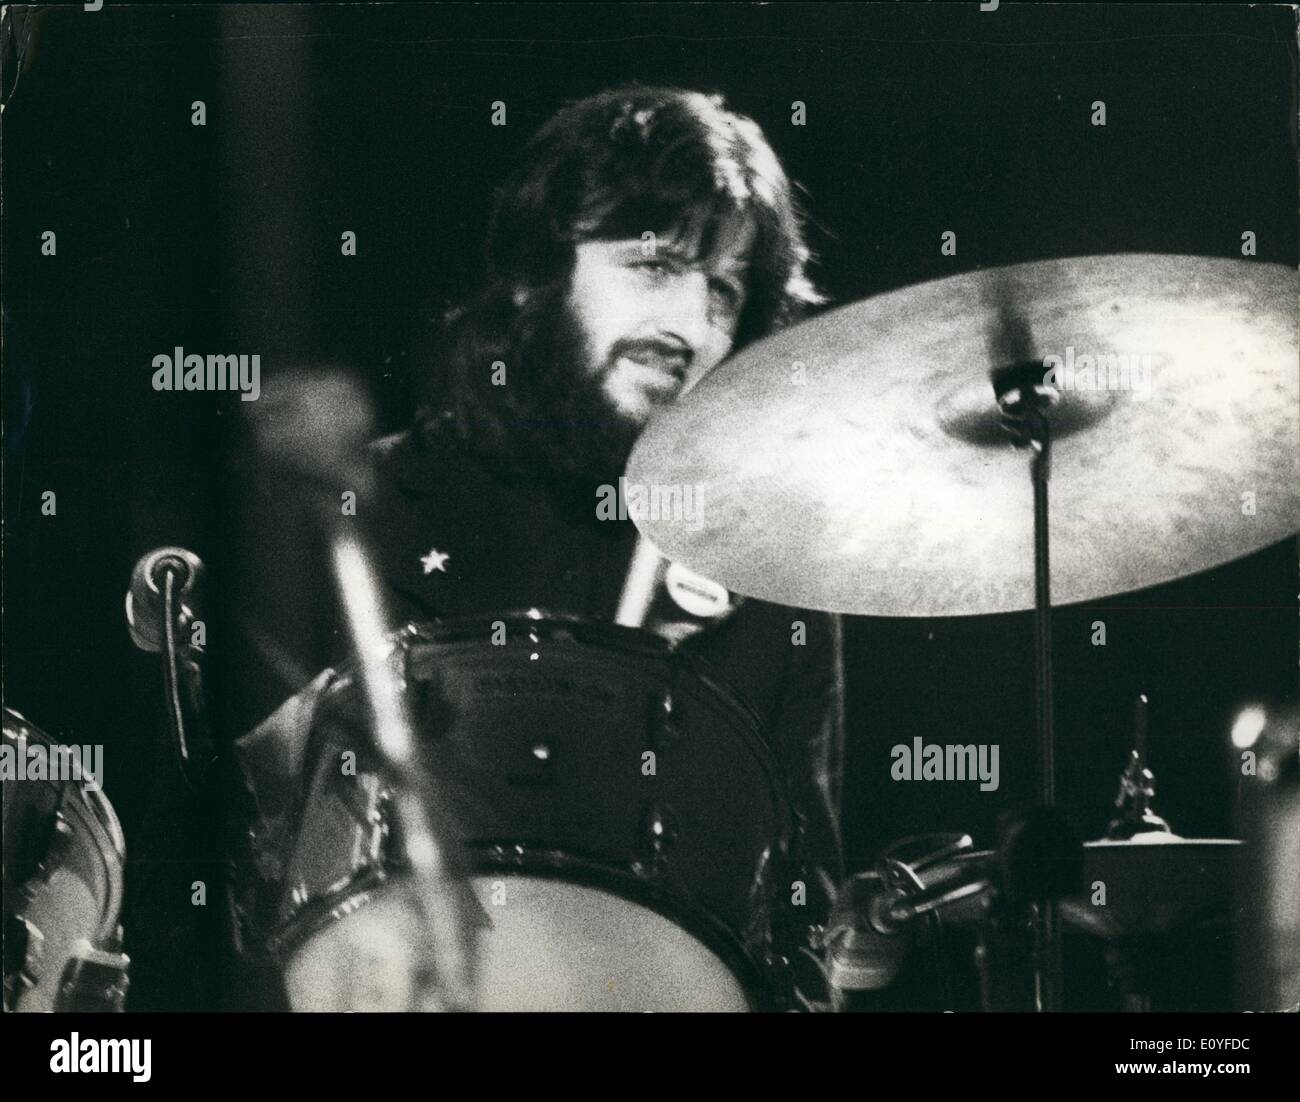 Jan. 1, 1970 - The newest face of Ringo Starr, Beatles Drummer, as seen by the thousands of devoted fans who attended the New York concert. Stock Photo